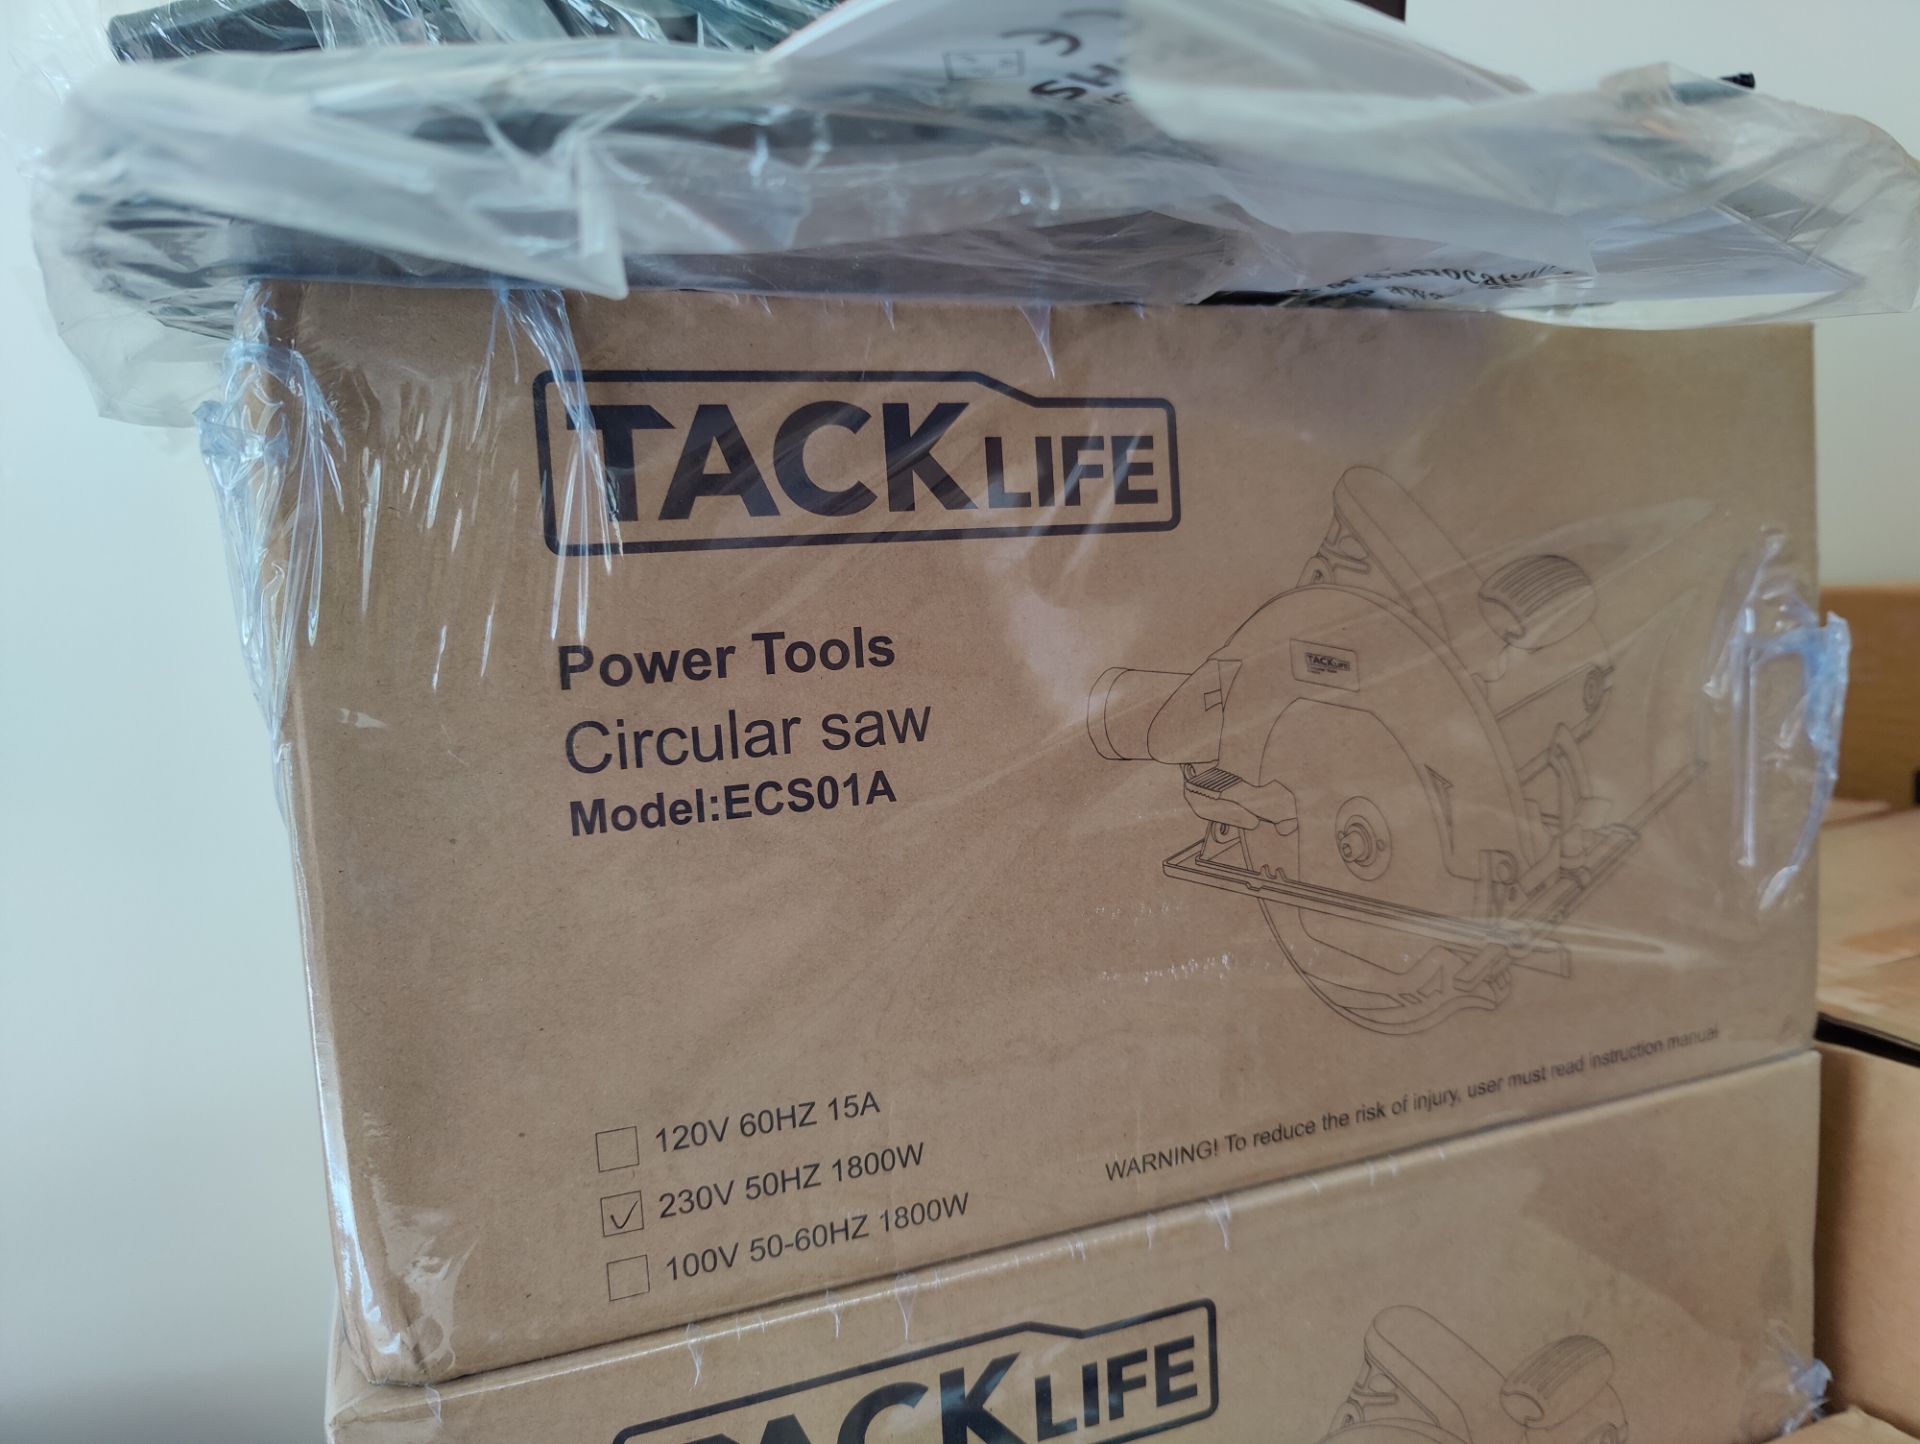 New Boxed Tacklife Electric Circular Saw,1500W, 5000 RPM With Bevel Cuts 2-3/5' - Image 4 of 4